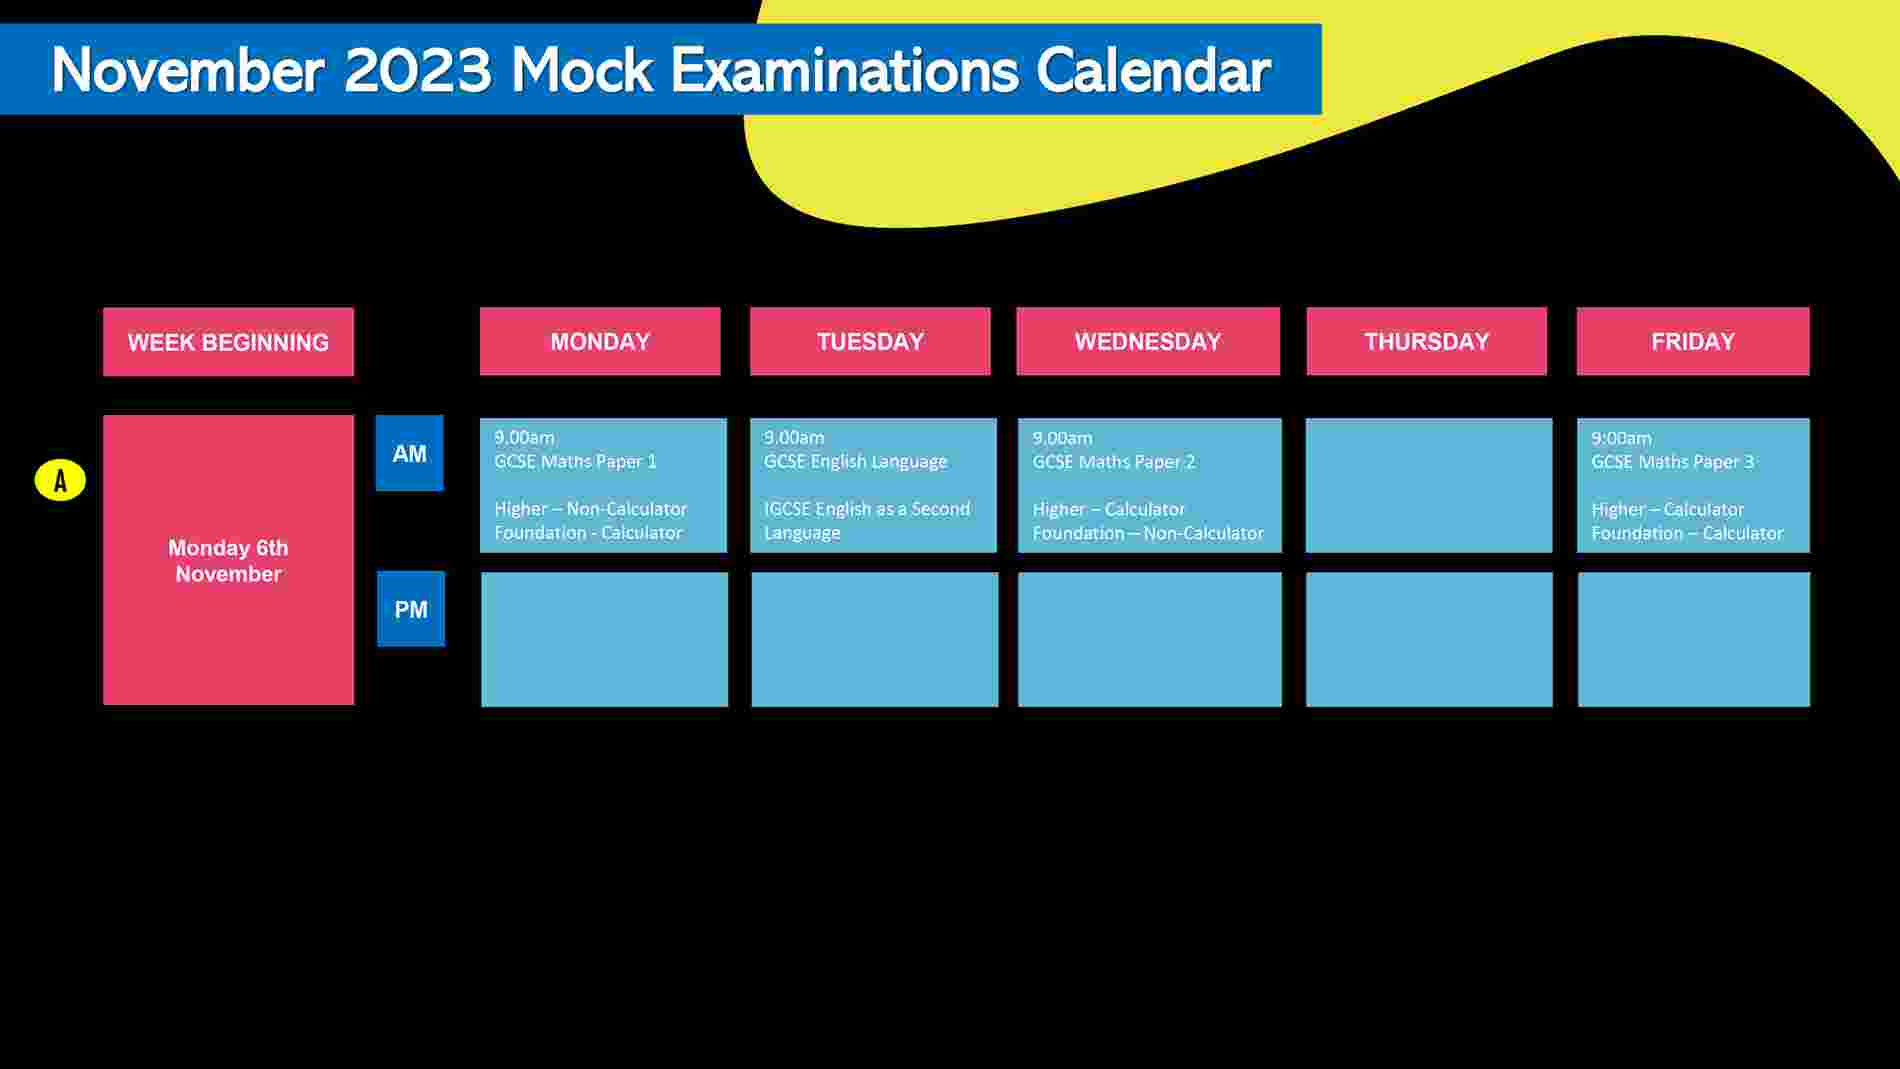 Exam Timetable Overview